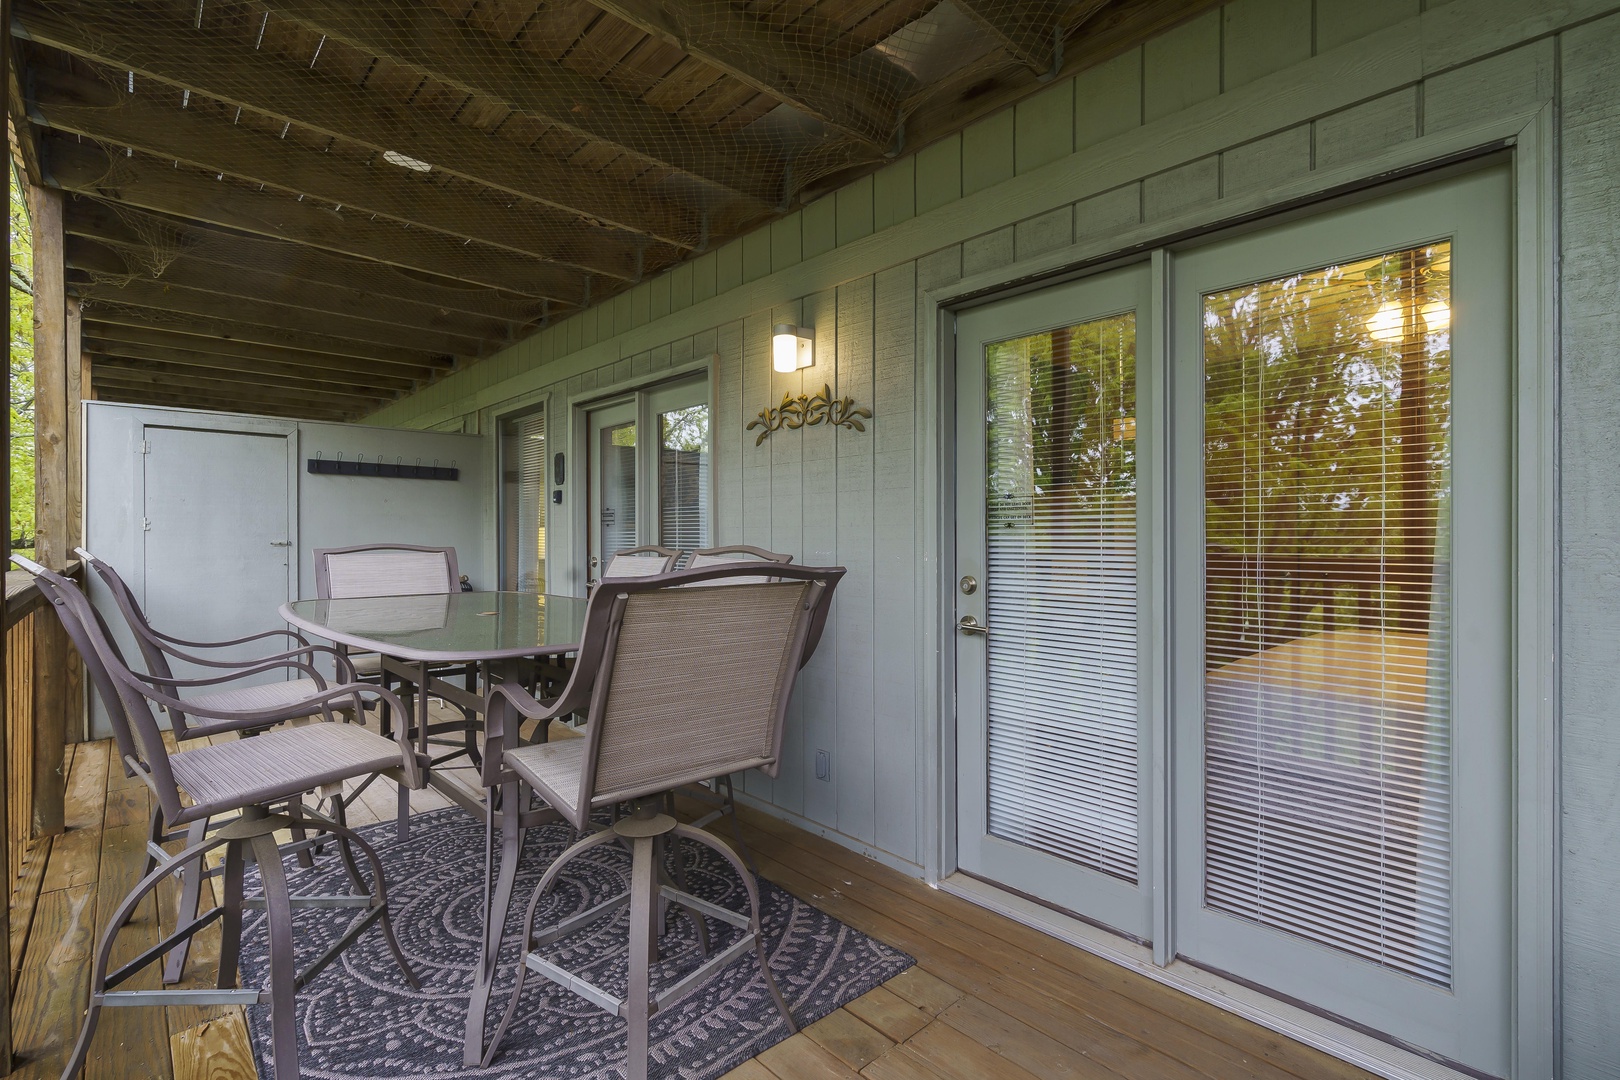 Covered deck with outdoor seating (unit 7)